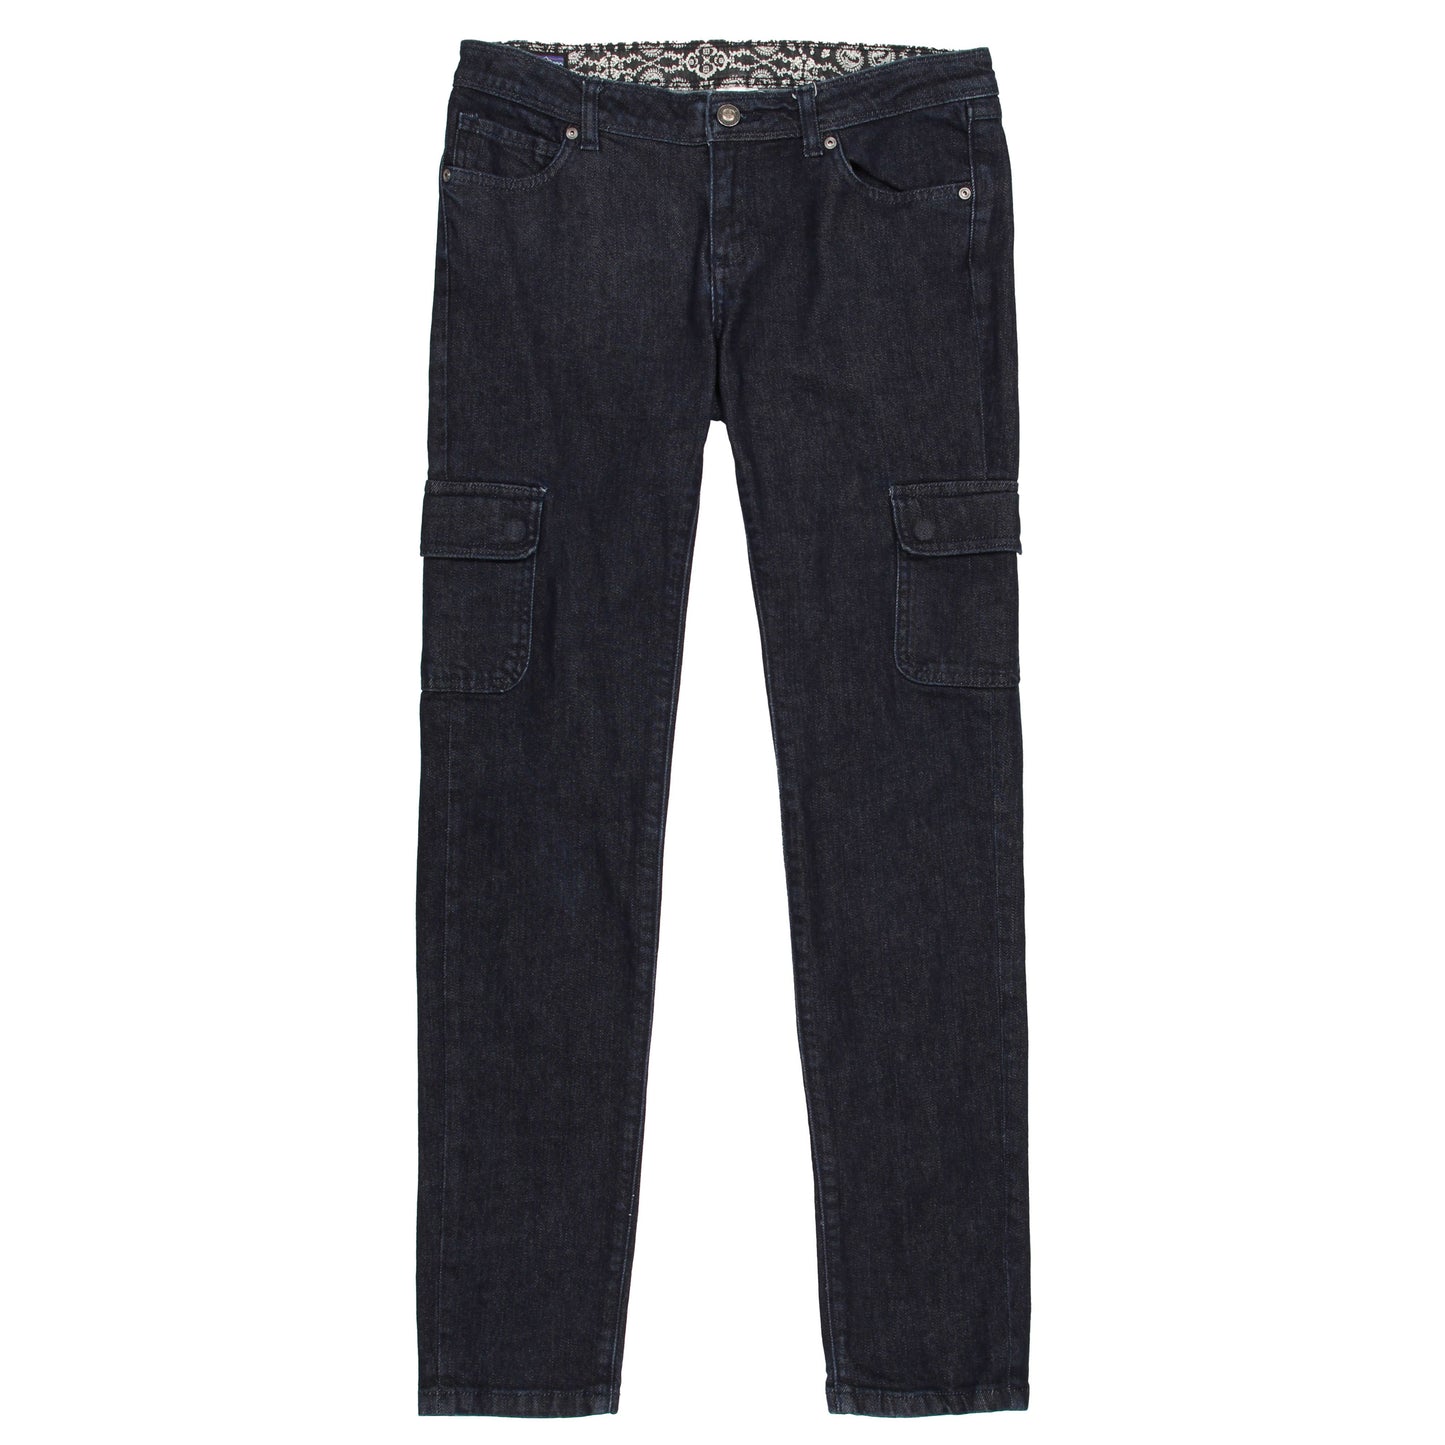 W's Low-Rise Cargo Jeans